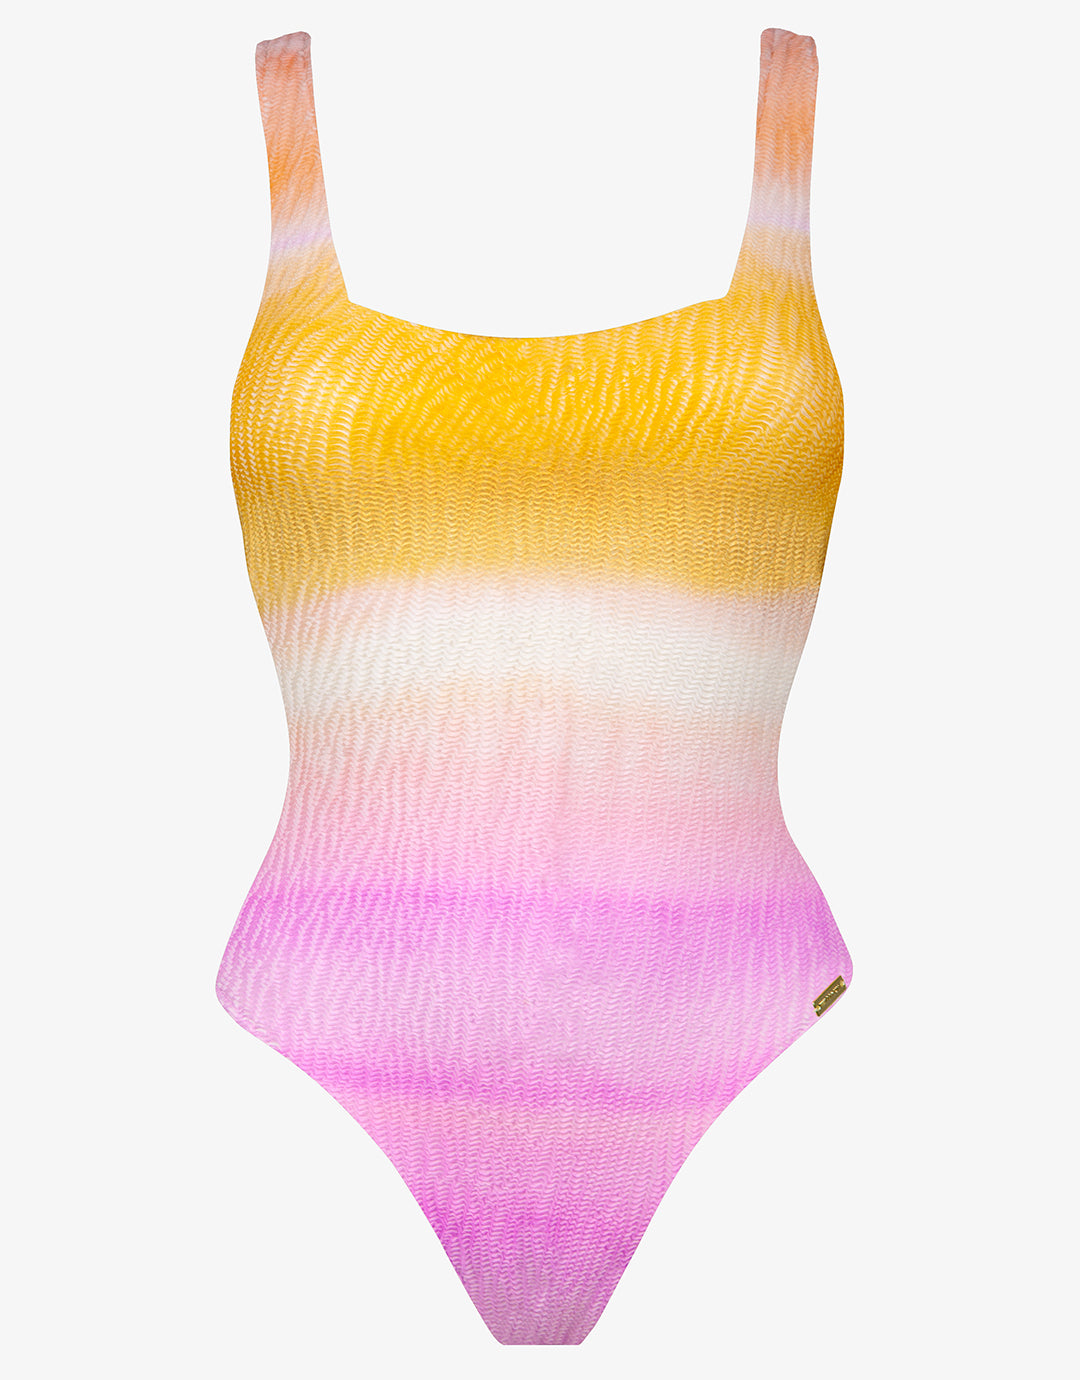 Ombre Flow Swimsuit - Gelato Hues - Simply Beach UK